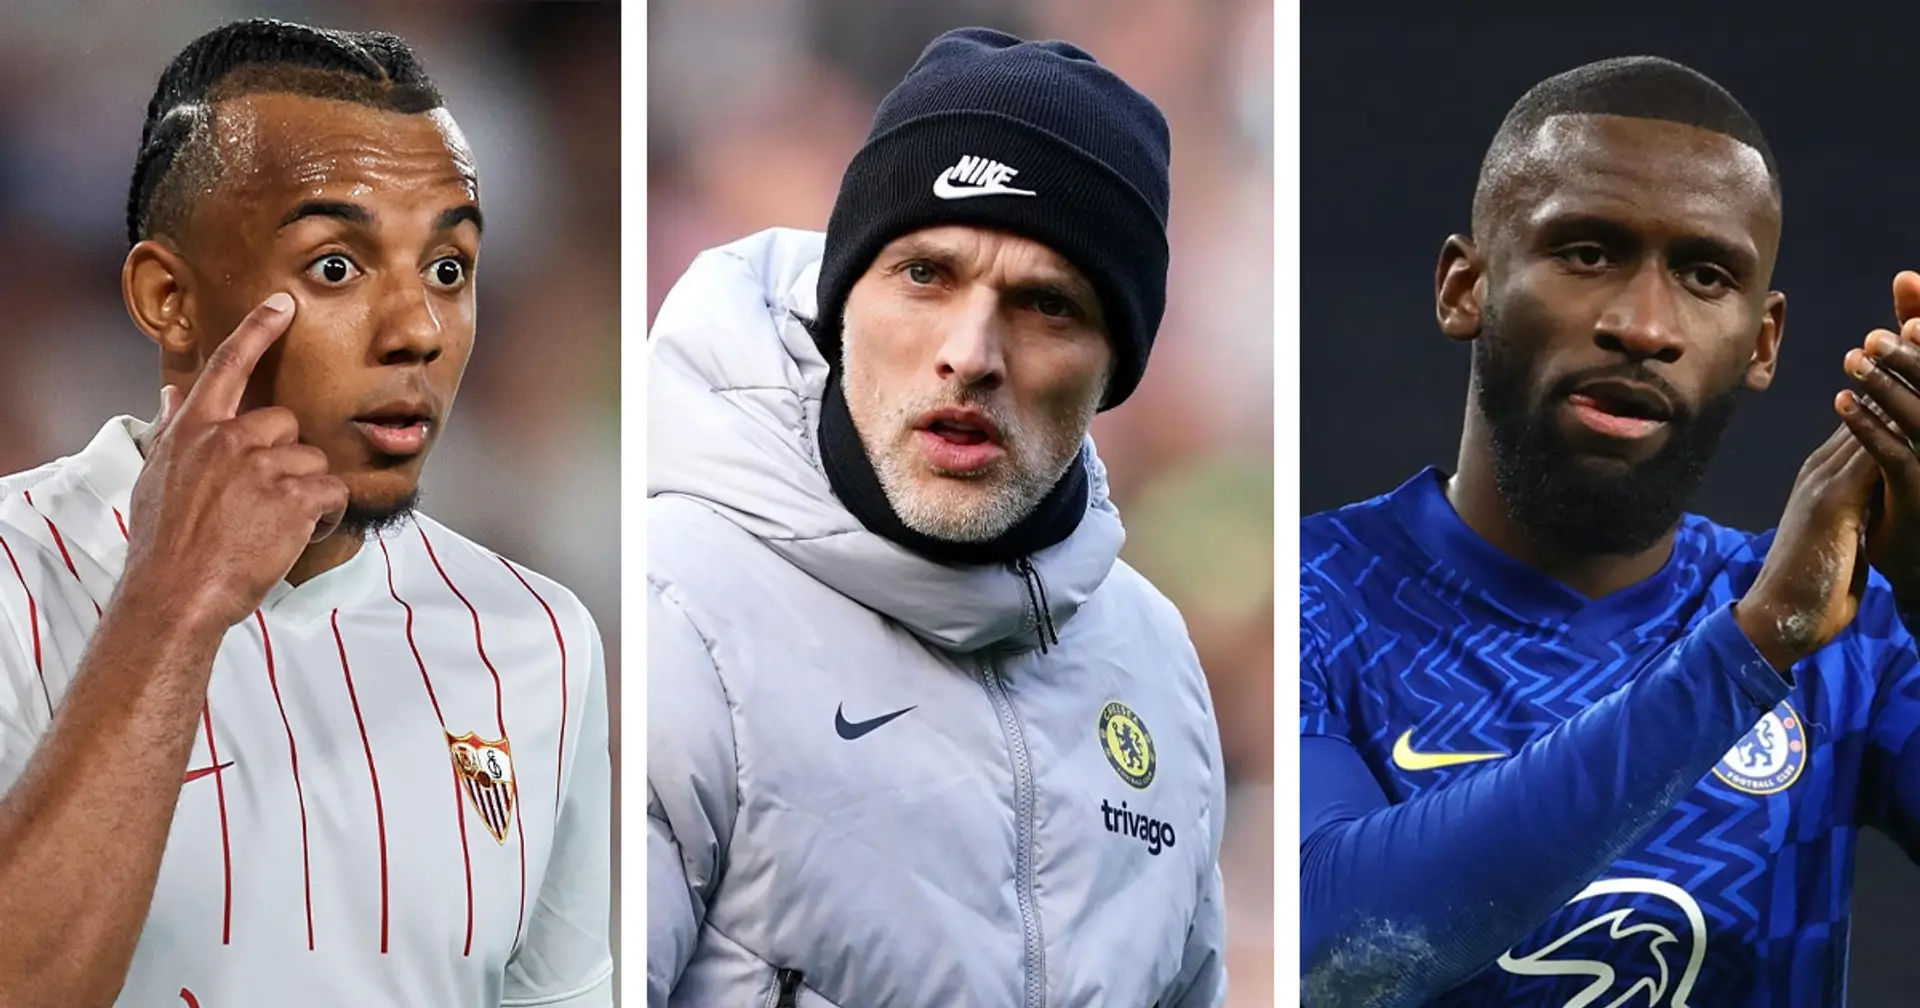 Chelsea consider 4 centre-backs as Rudiger replacements, Kounde on the list (reliability: 4 stars)